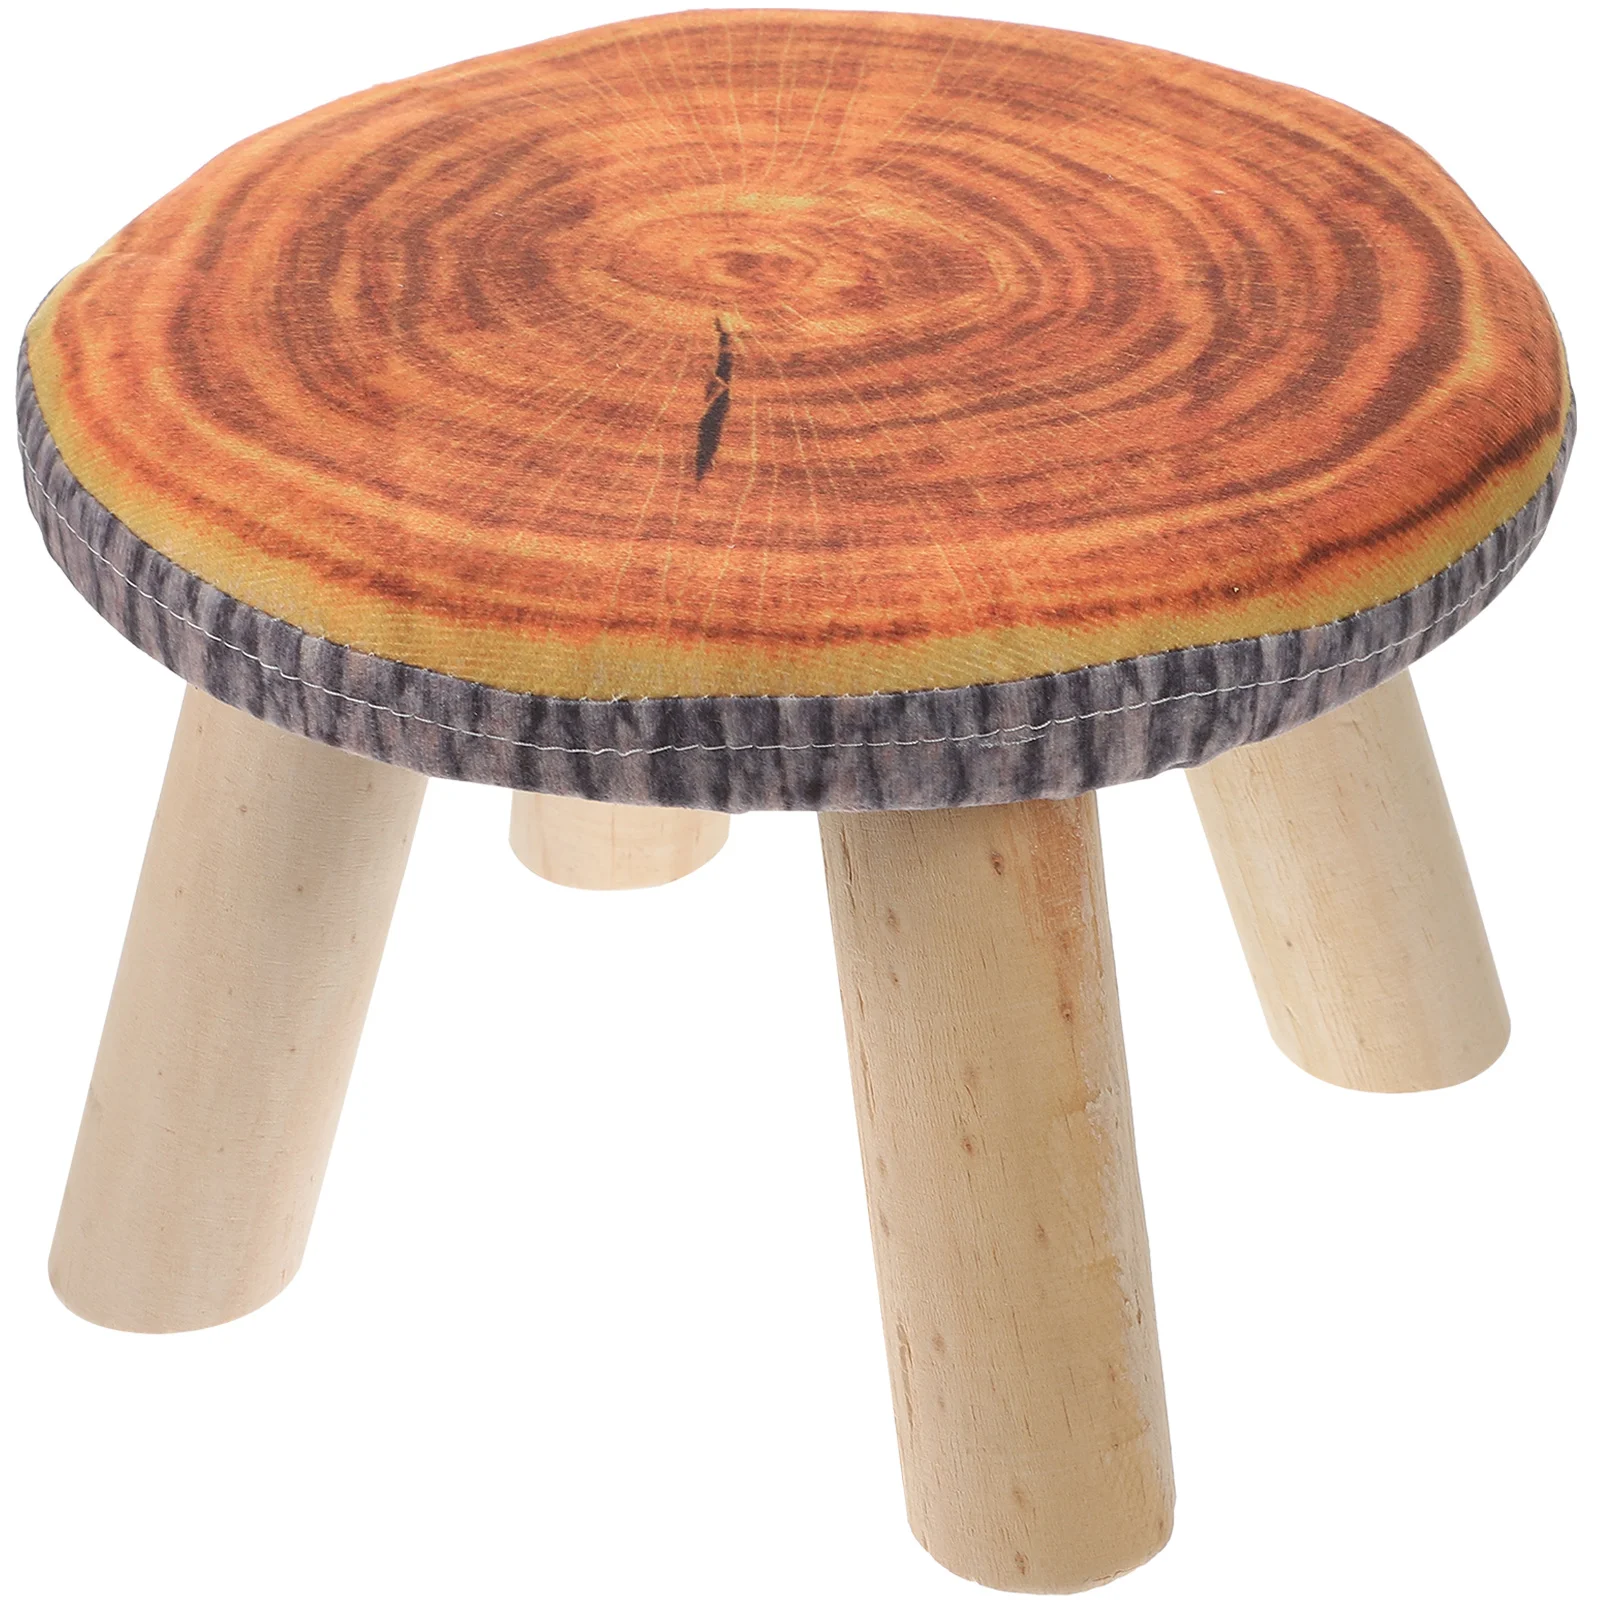 Small Bench Toddler Stool Stools Outdoor Stepping Kids Decorative Wood Wooden Classroom